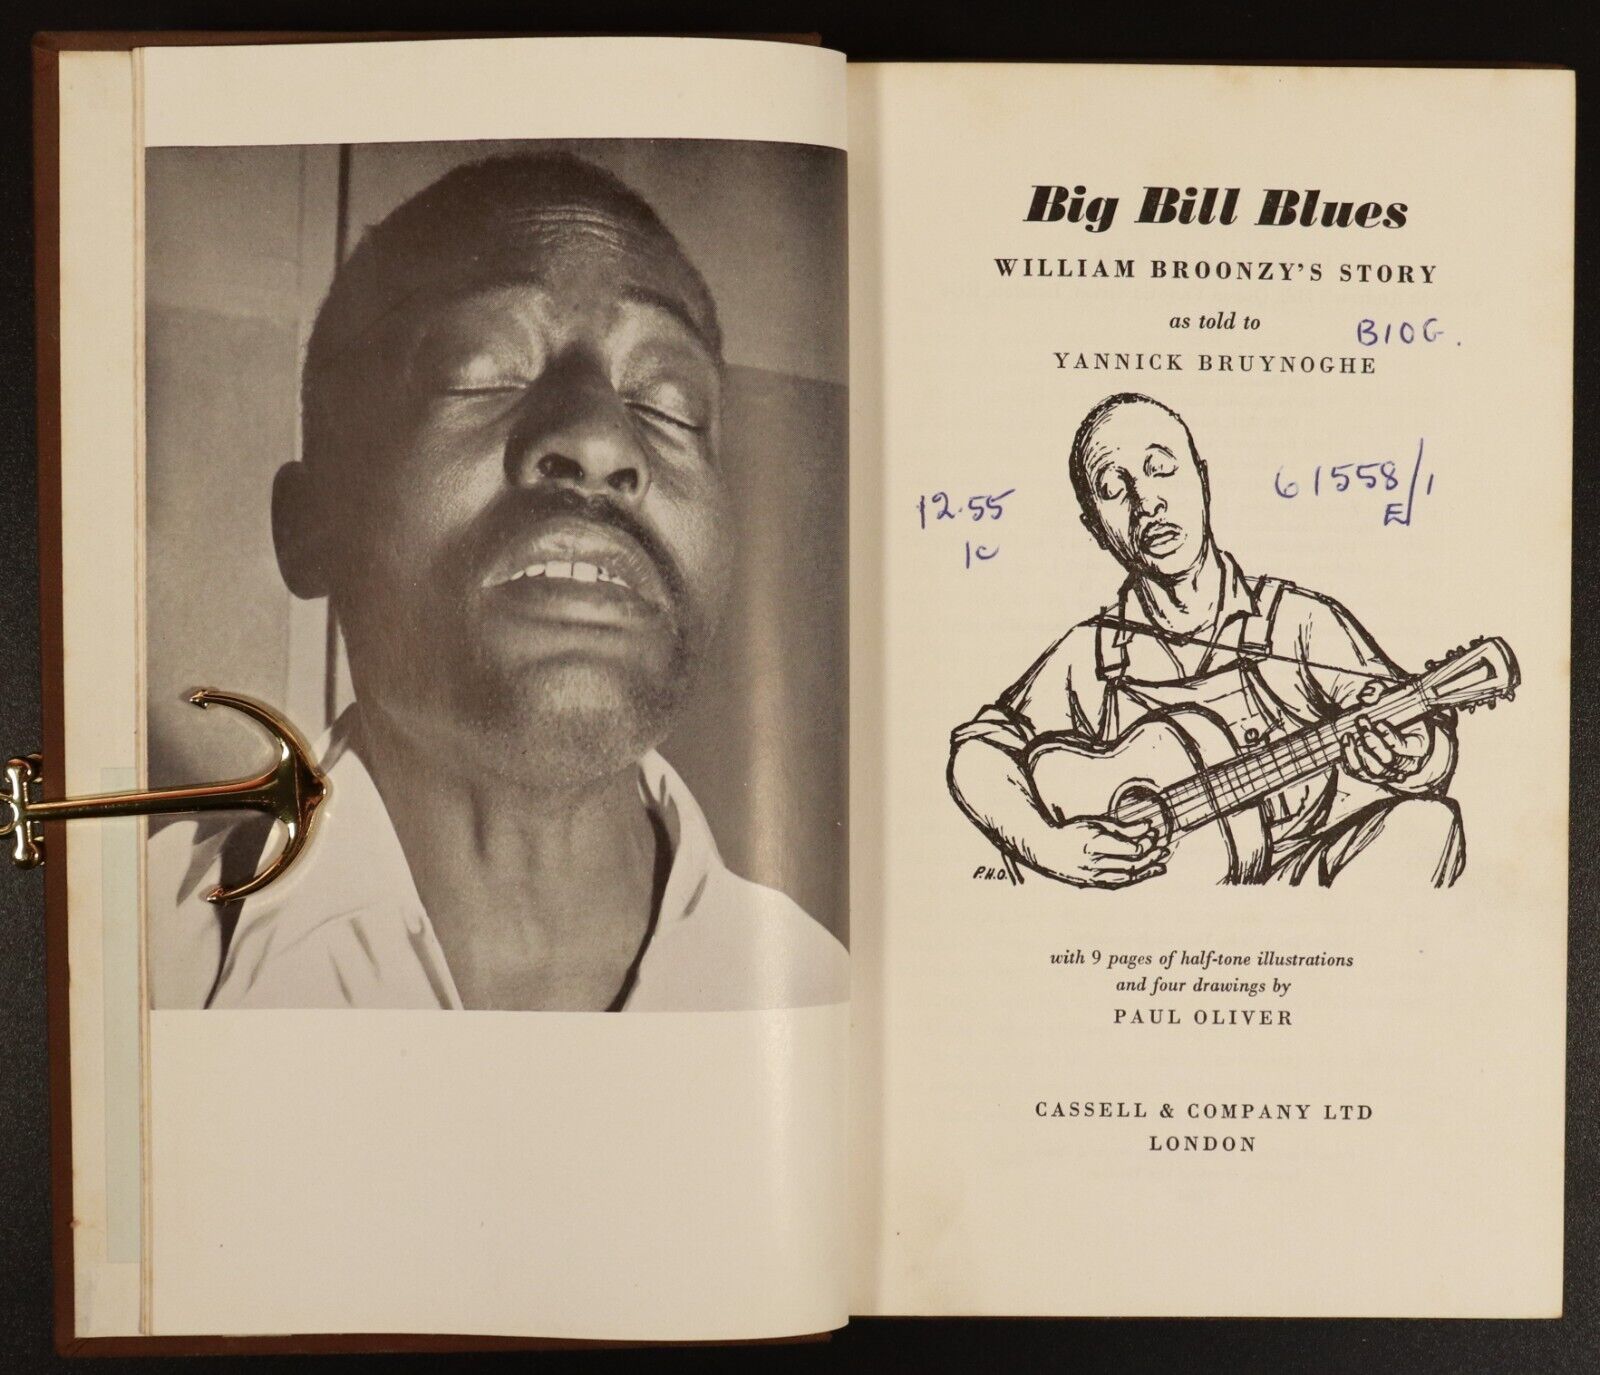 1955 Big Bill Blues William Broonzy's Story 1st Edition American Music Book - 0